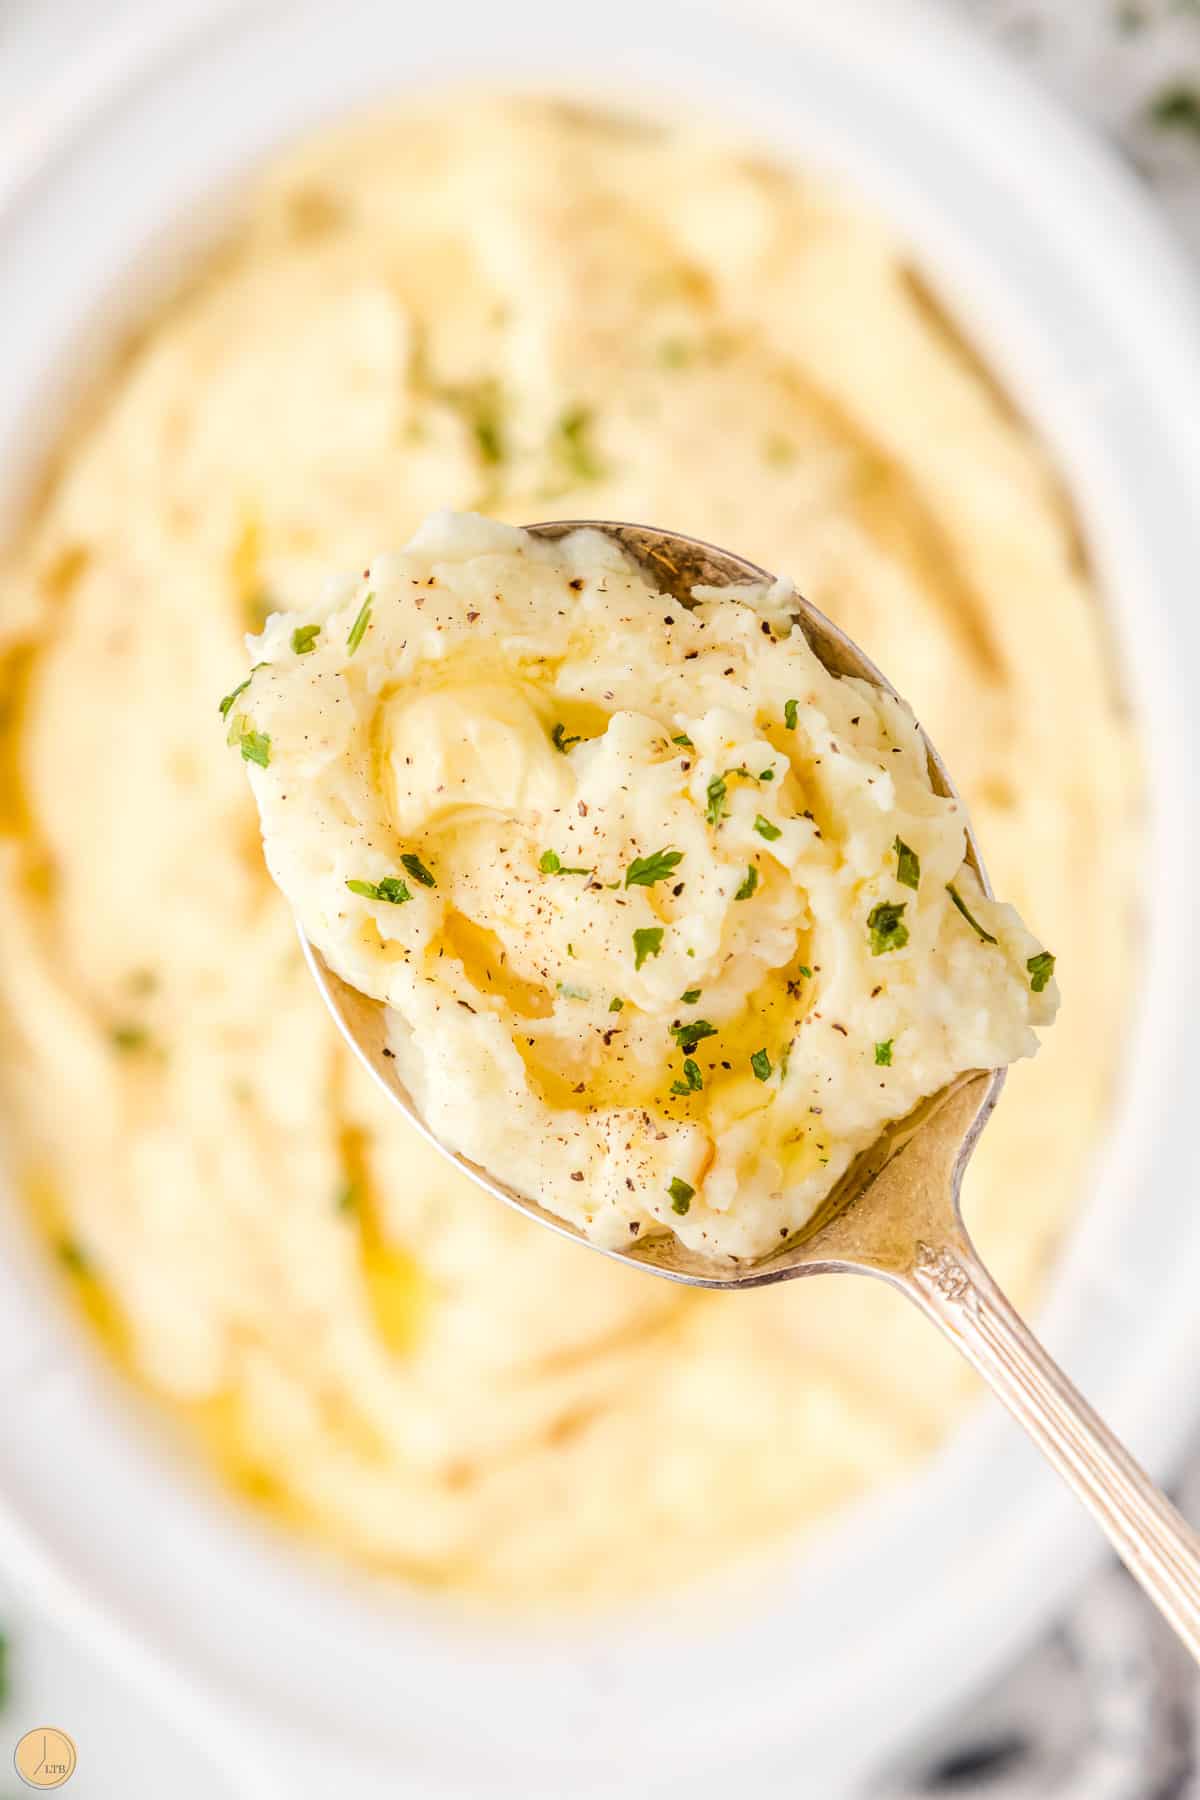 spoon of mashed potatoes with fresh parsley